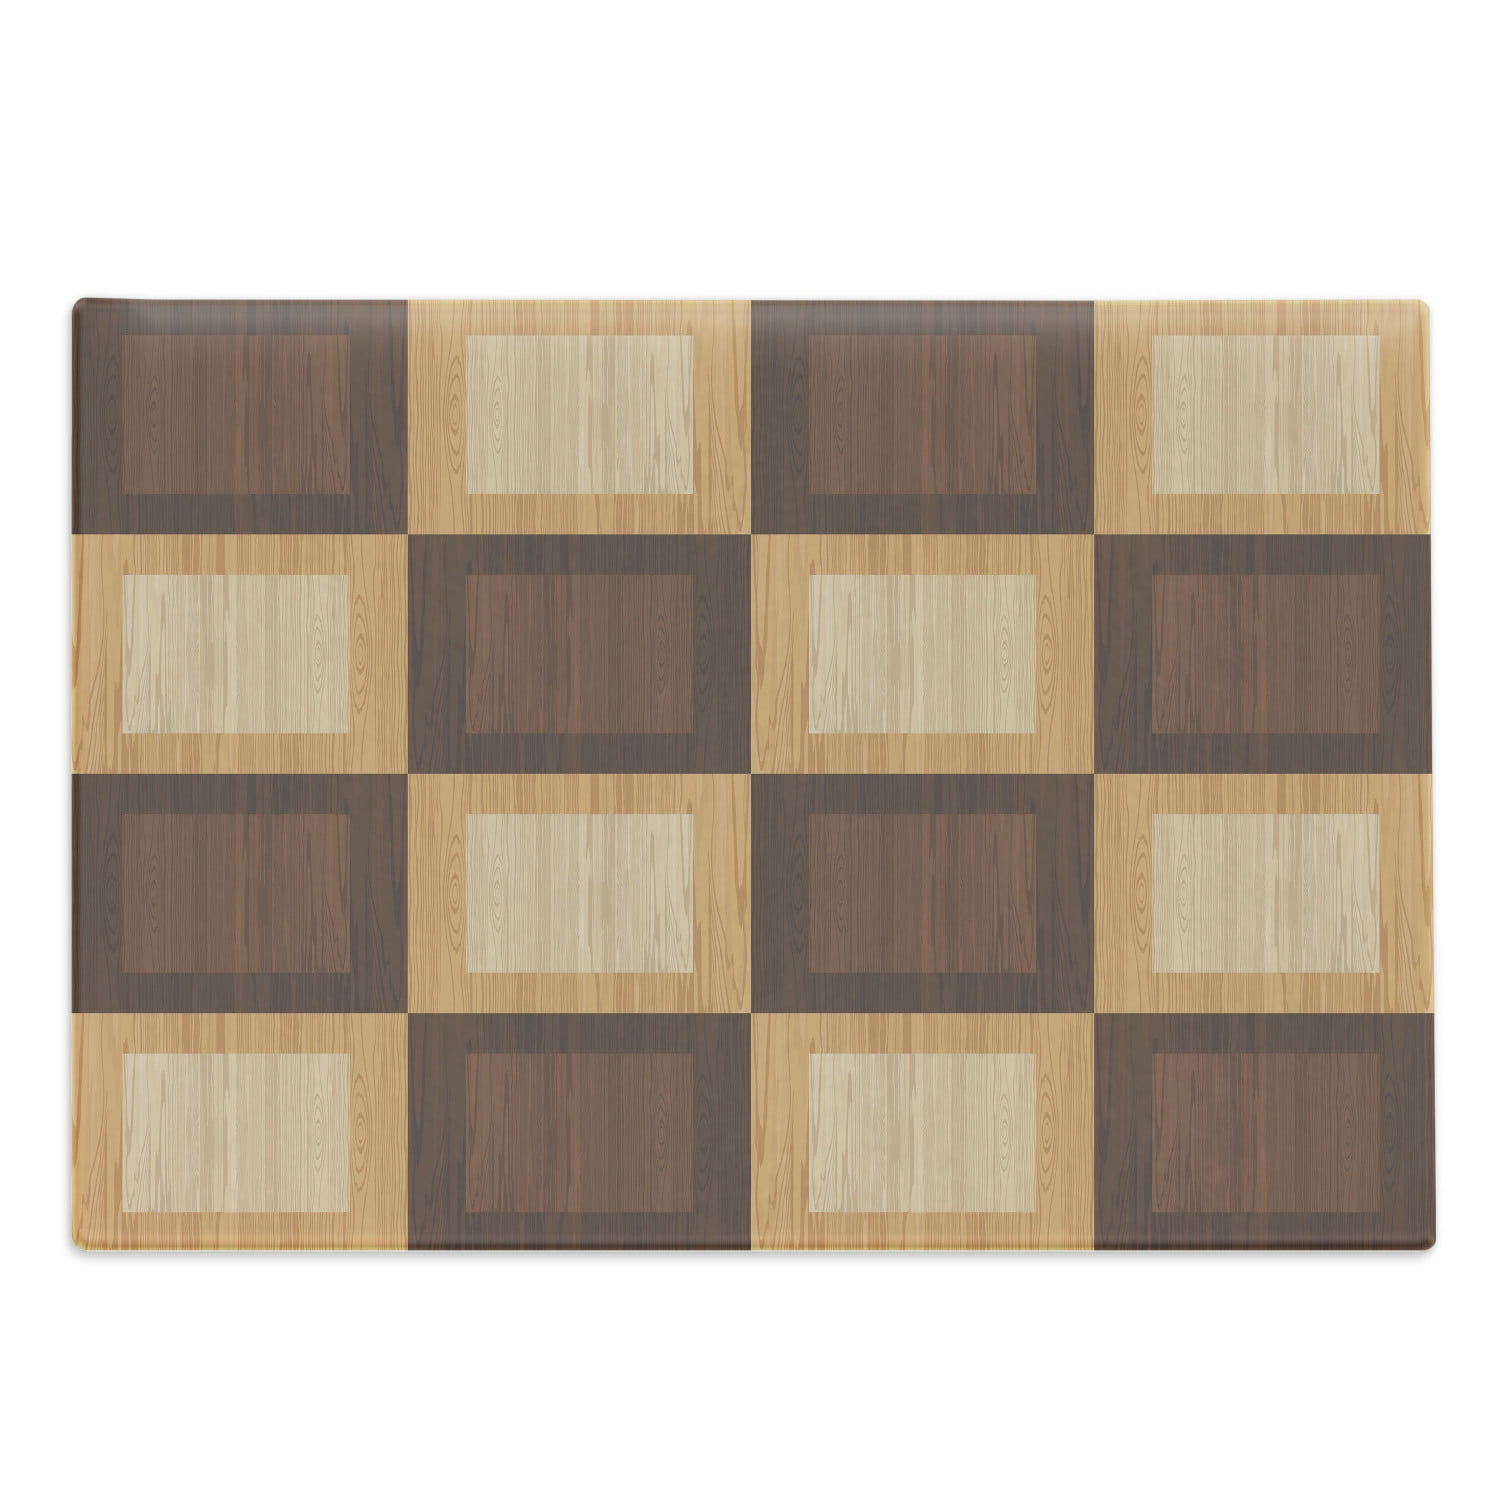 Checkered Cutting Board, Empty Checkerboard Wooden Seem Mosaic Texture  Image Chess Game Hobby Theme, Decorative Tempered Glass Cutting and Serving  Board, Large Size, Brown Pale Brown, by Ambesonne 